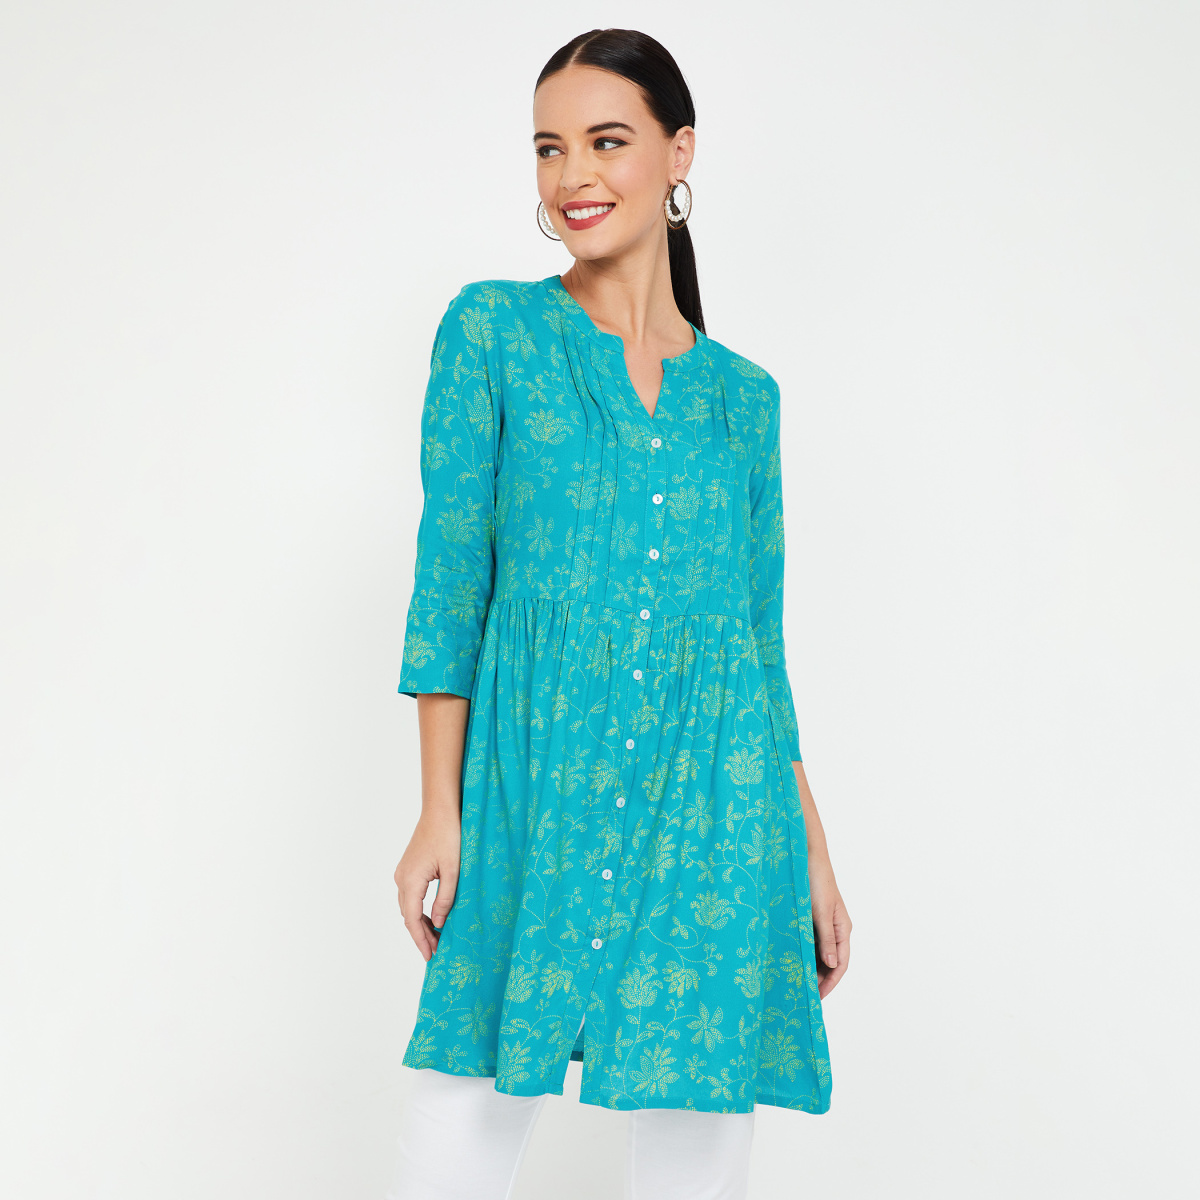 COLOUR ME Printed Tunic with Button Placket